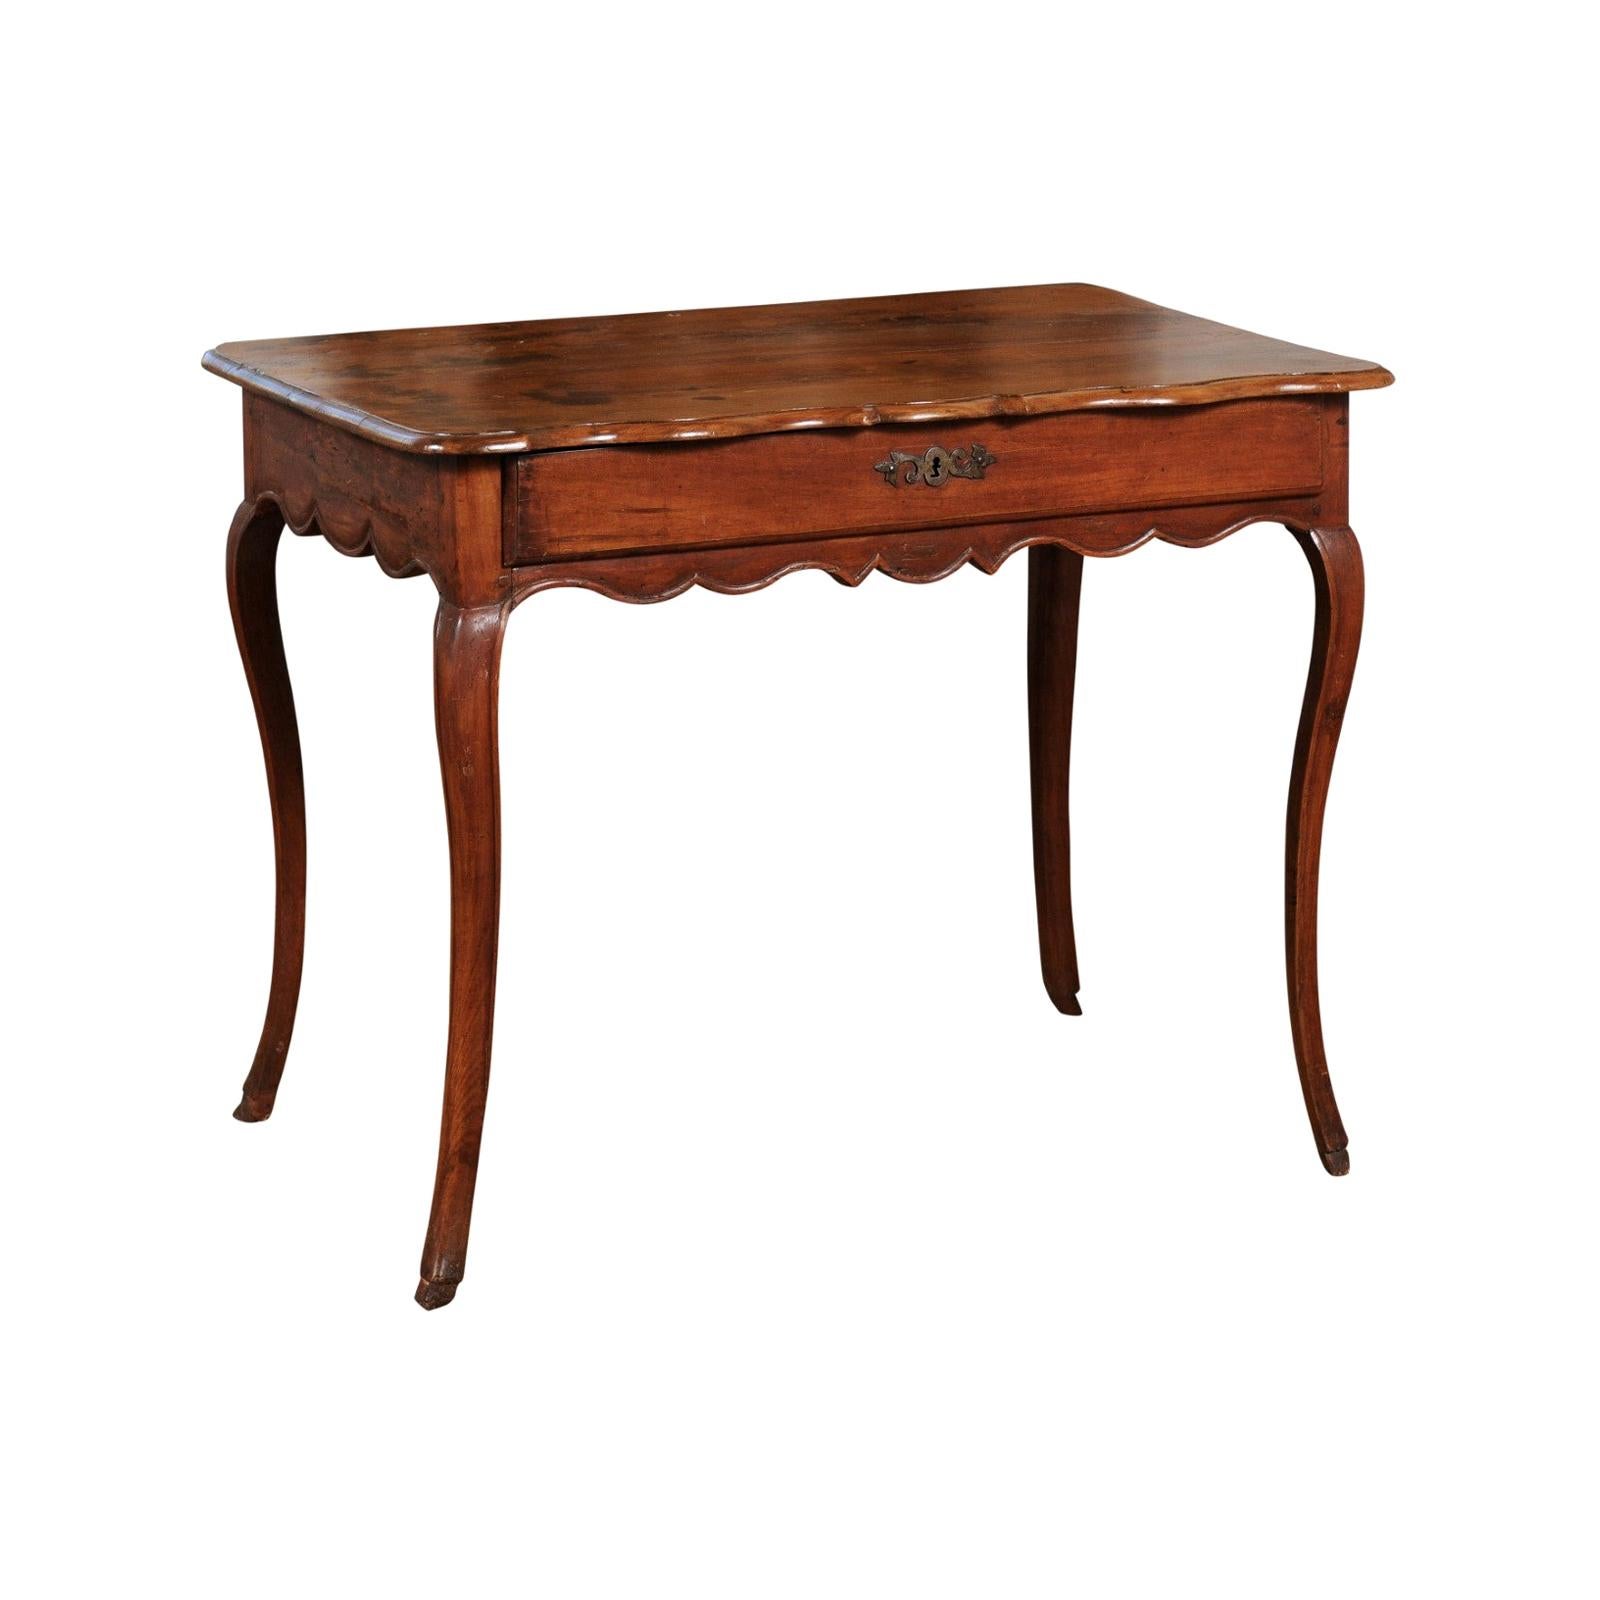 French Louis XV Late 18th Century Cherry Table with Drawer from the Rhône Valley For Sale